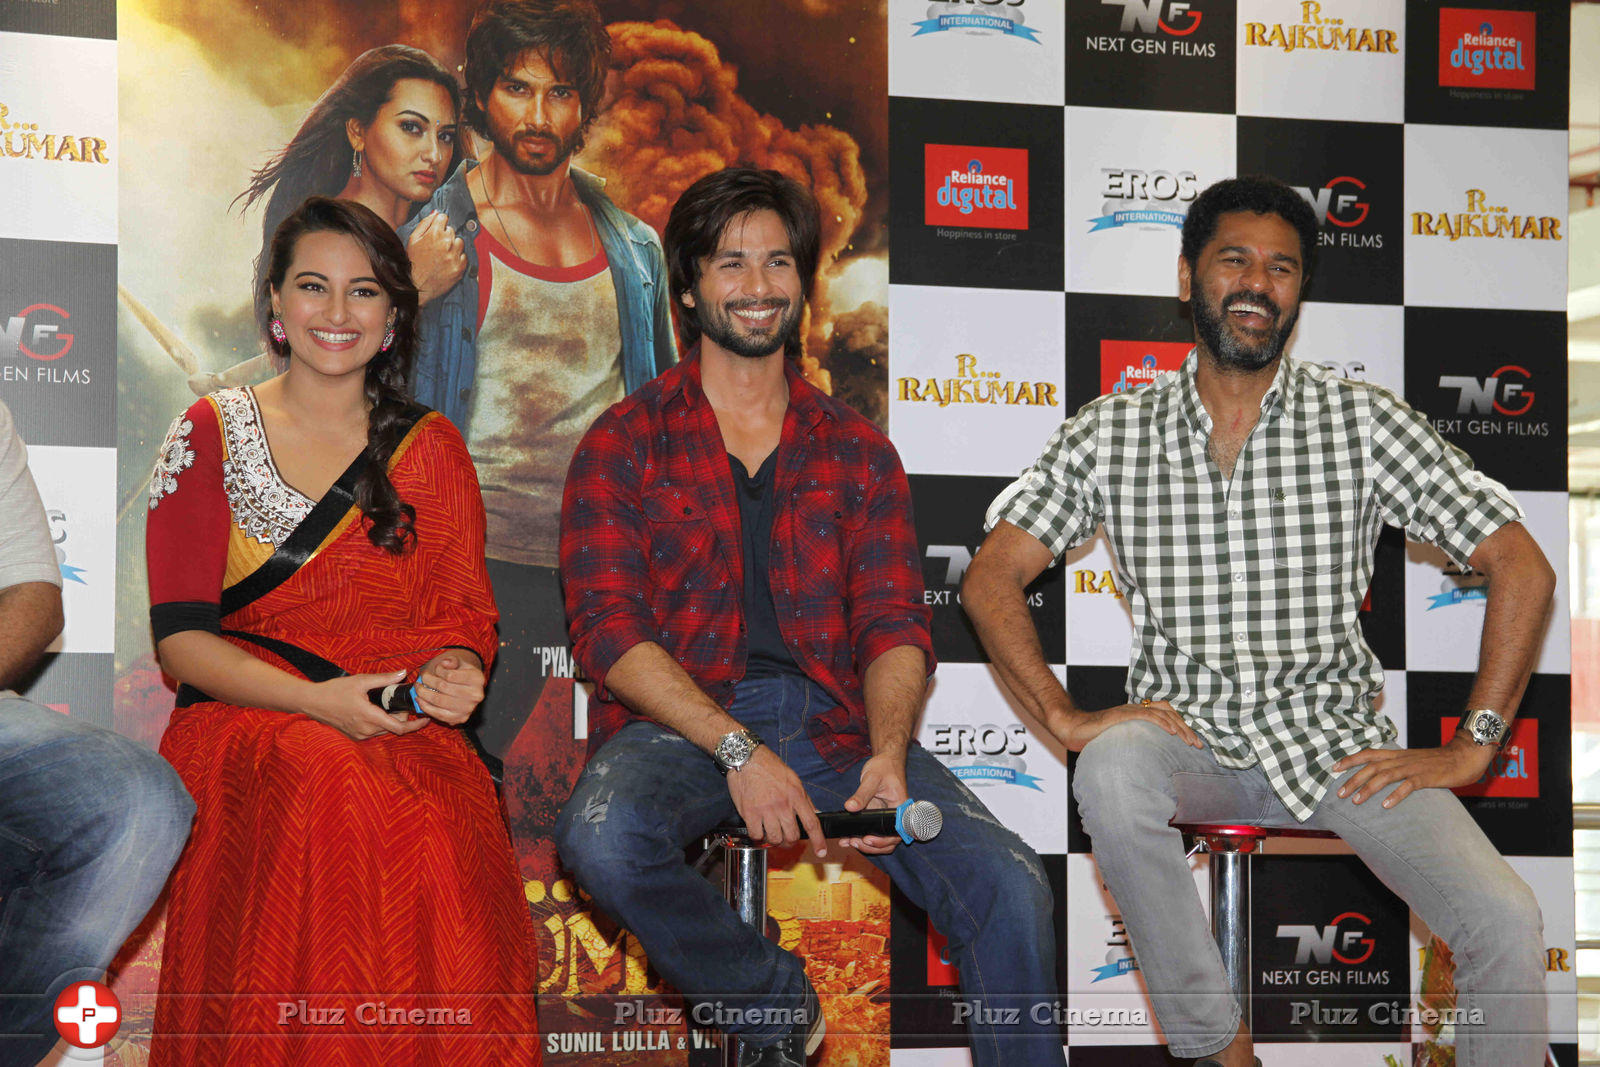 Shahid and Sonakshi Promote R Rajkumar at Reliance Digital Photos | Picture 657598